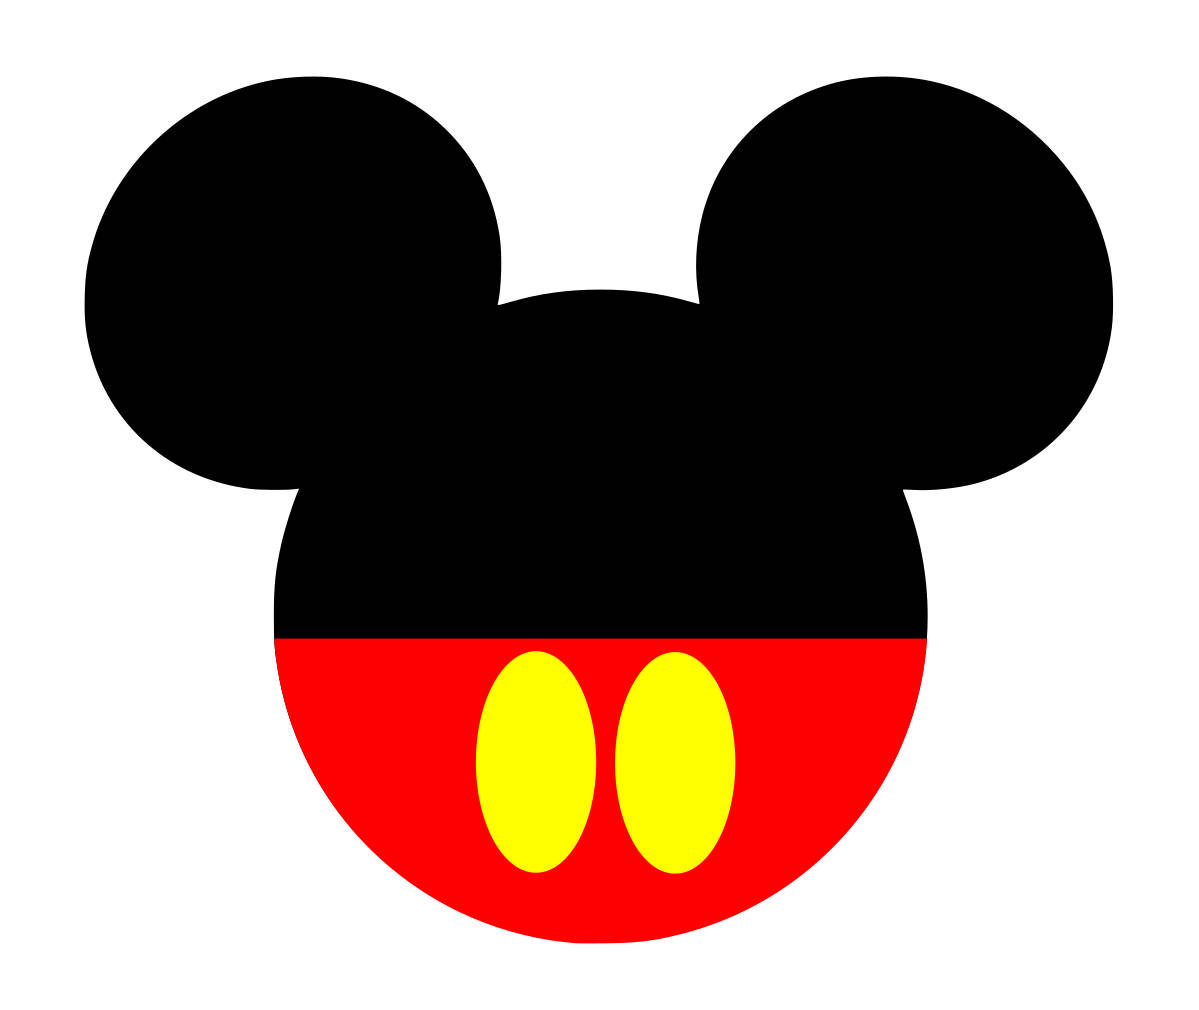 Mickey Mouse Ears Vector at GetDrawings | Free download